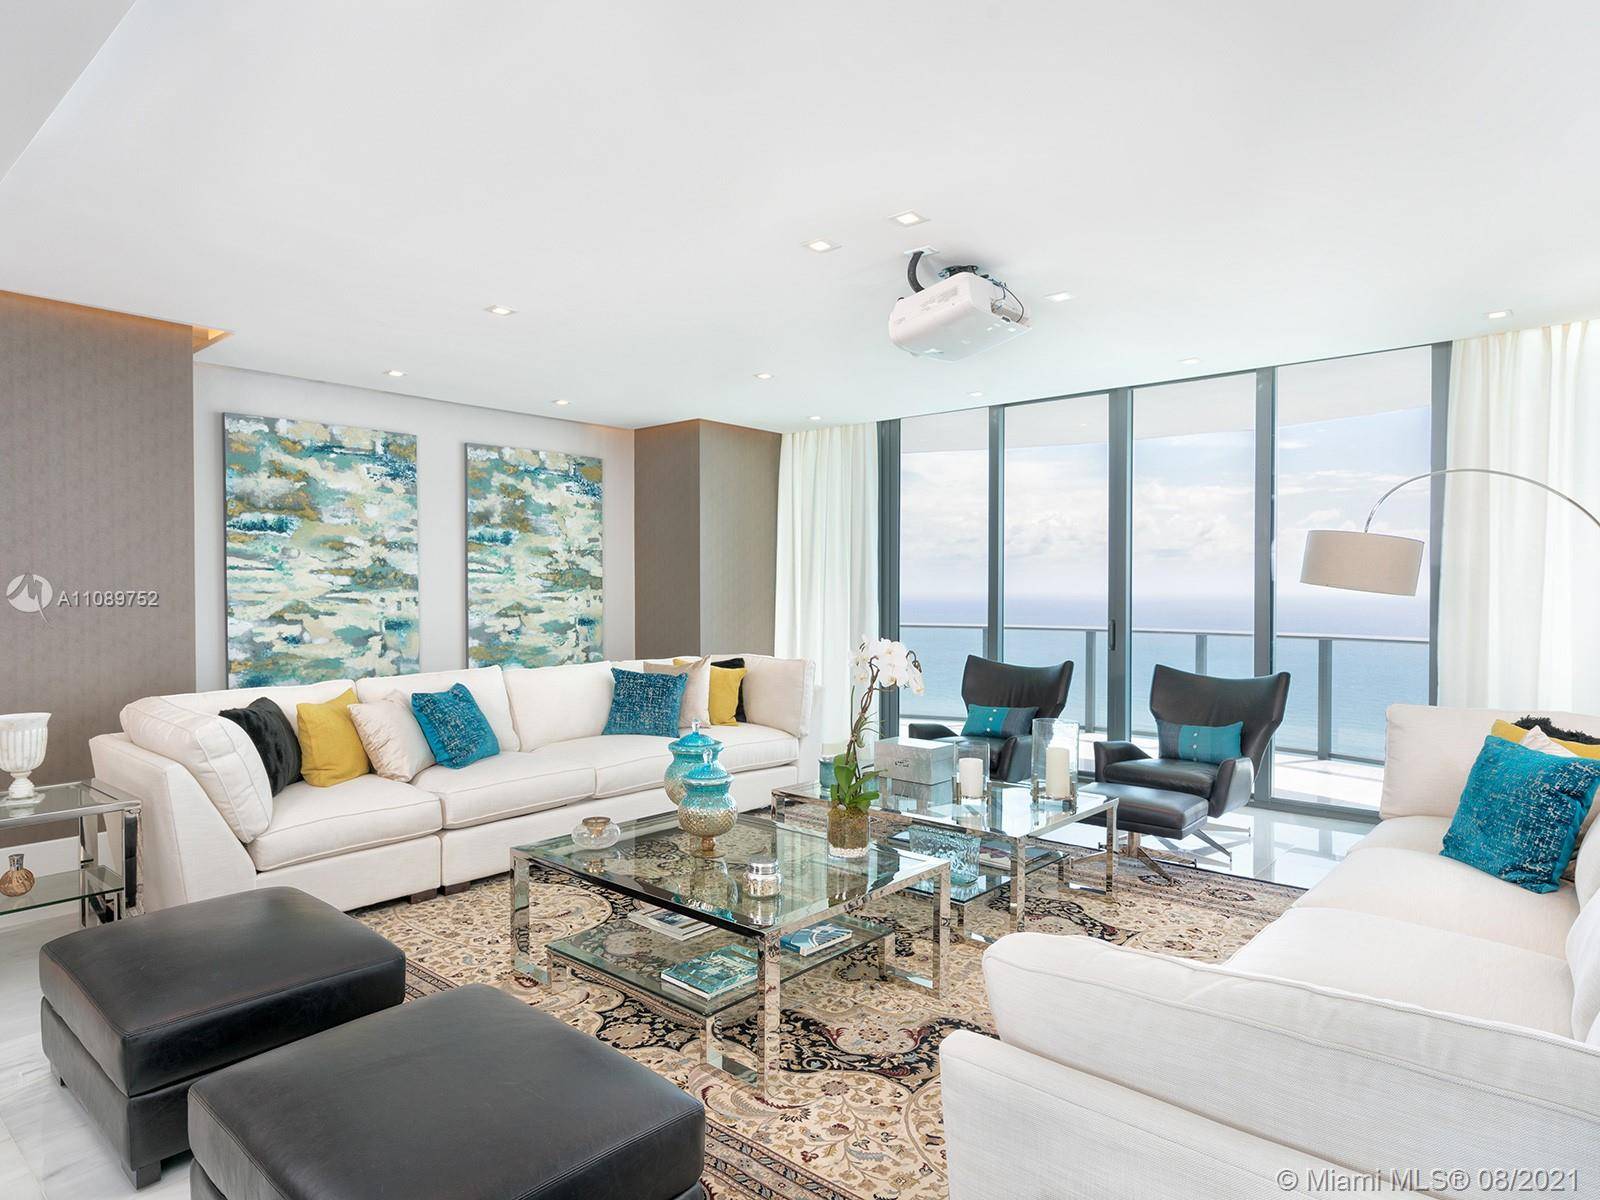 Unit 42 is the highest residence below penthouse encompassing an entire floor with 360 wrap around terrace providing truly unobstructed views of ocean, Intracostal, Miami, Miami Beach and Fort Lauderdale.